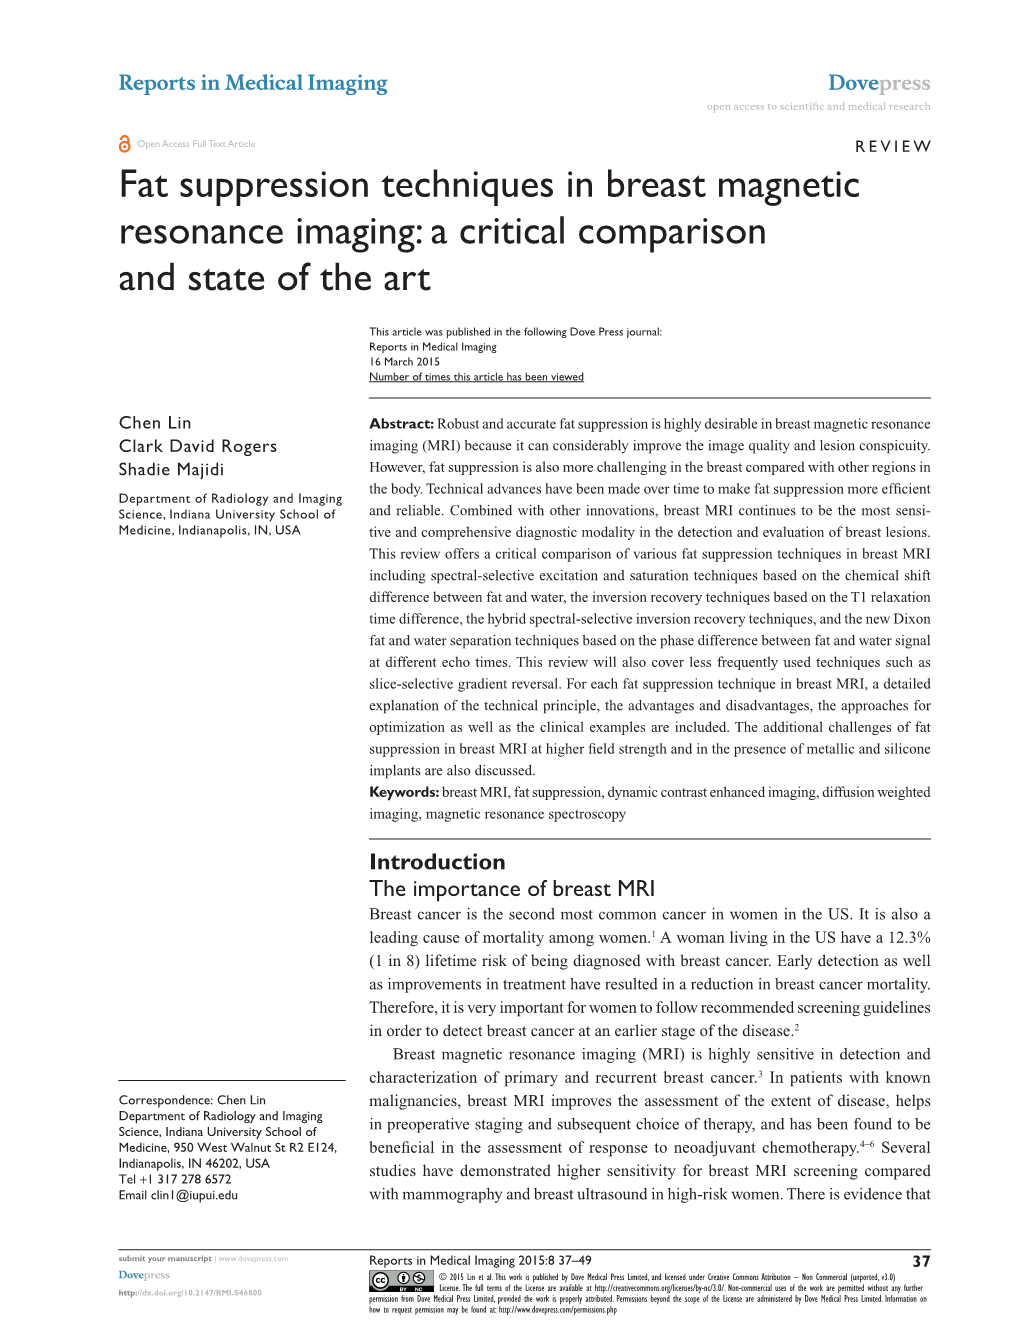 Fat Suppression Techniques in Breast Magnetic Resonance Imaging: a Critical Comparison and State of the Art